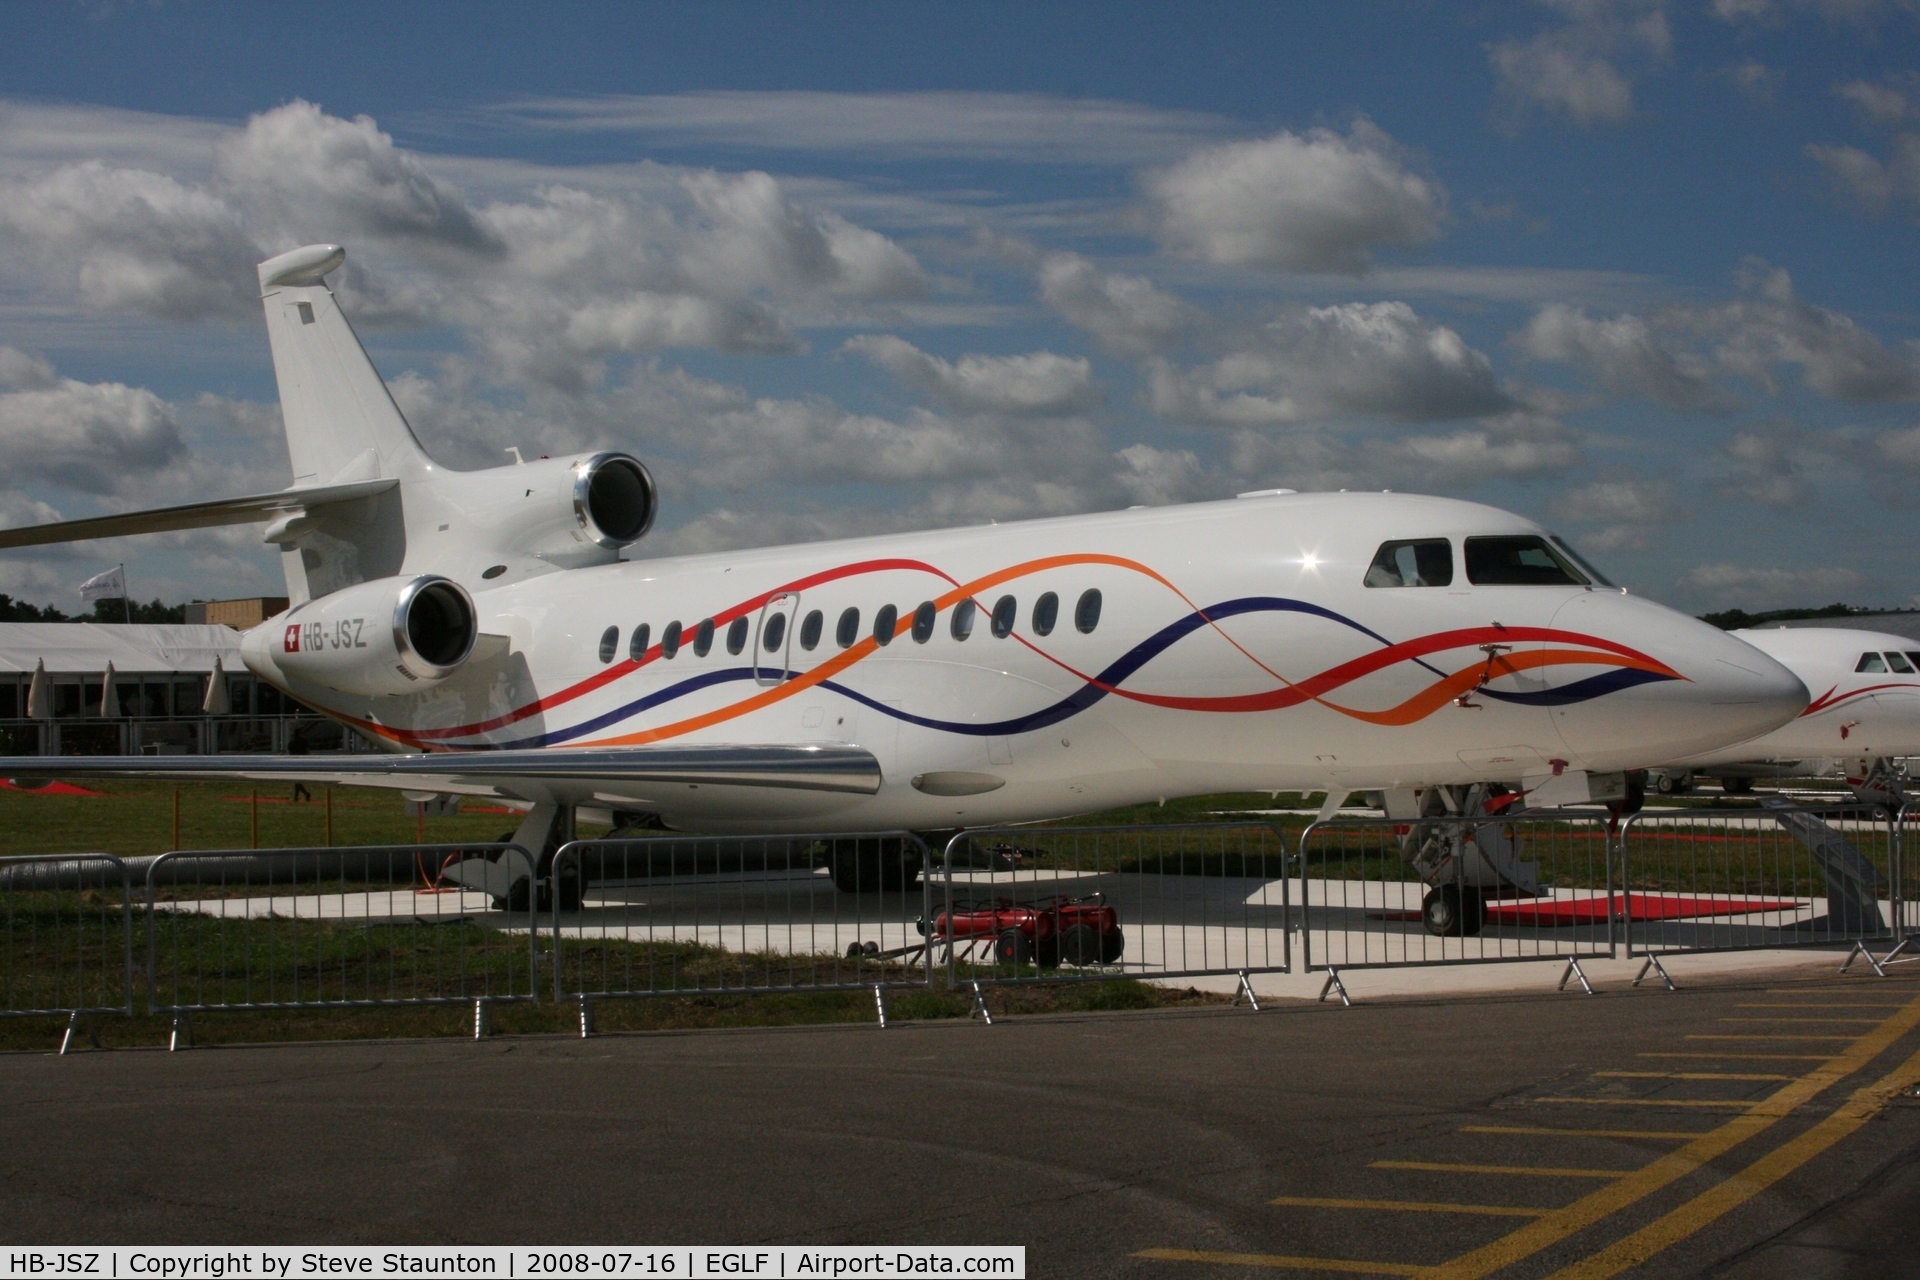 HB-JSZ, 2007 Dassault Falcon 7X C/N 004, Taken at Farnborough Airshow on the Wednesday trade day, 16th July 2009